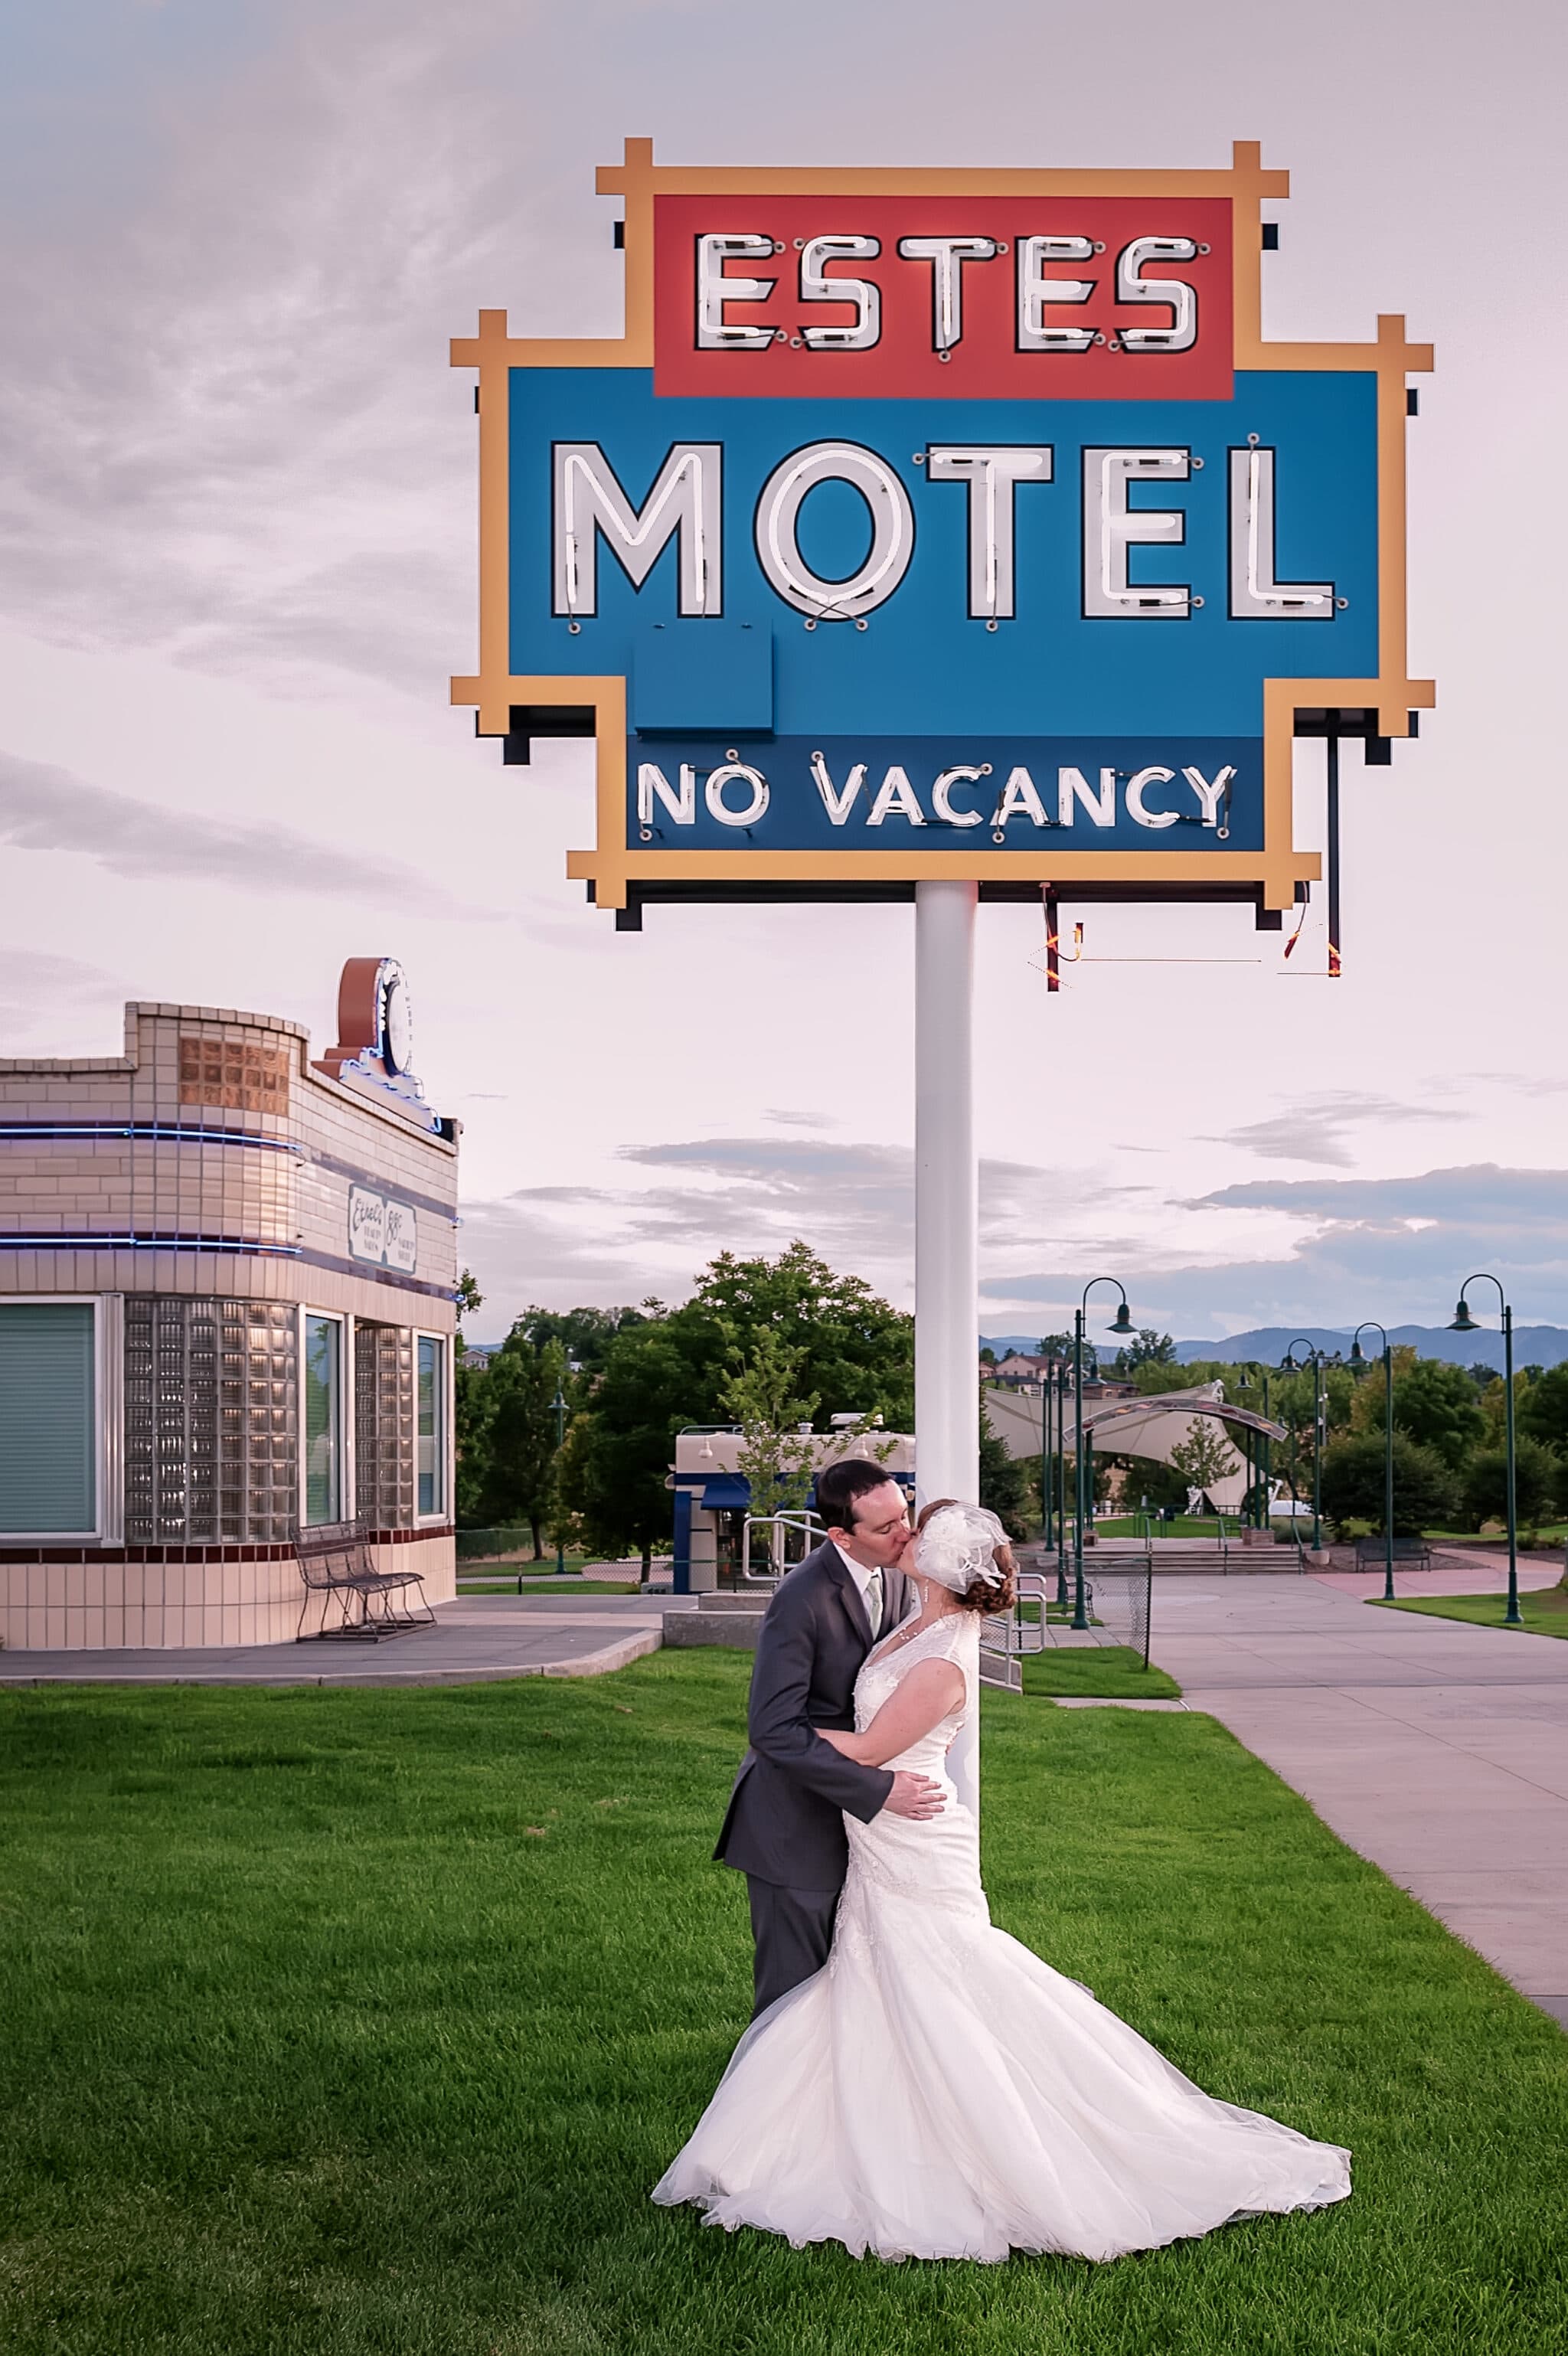 A bride and groom kiss in front of a historic motel sign that says "Estes Motel - No Vacancy" at Lakewood Heritage Center.